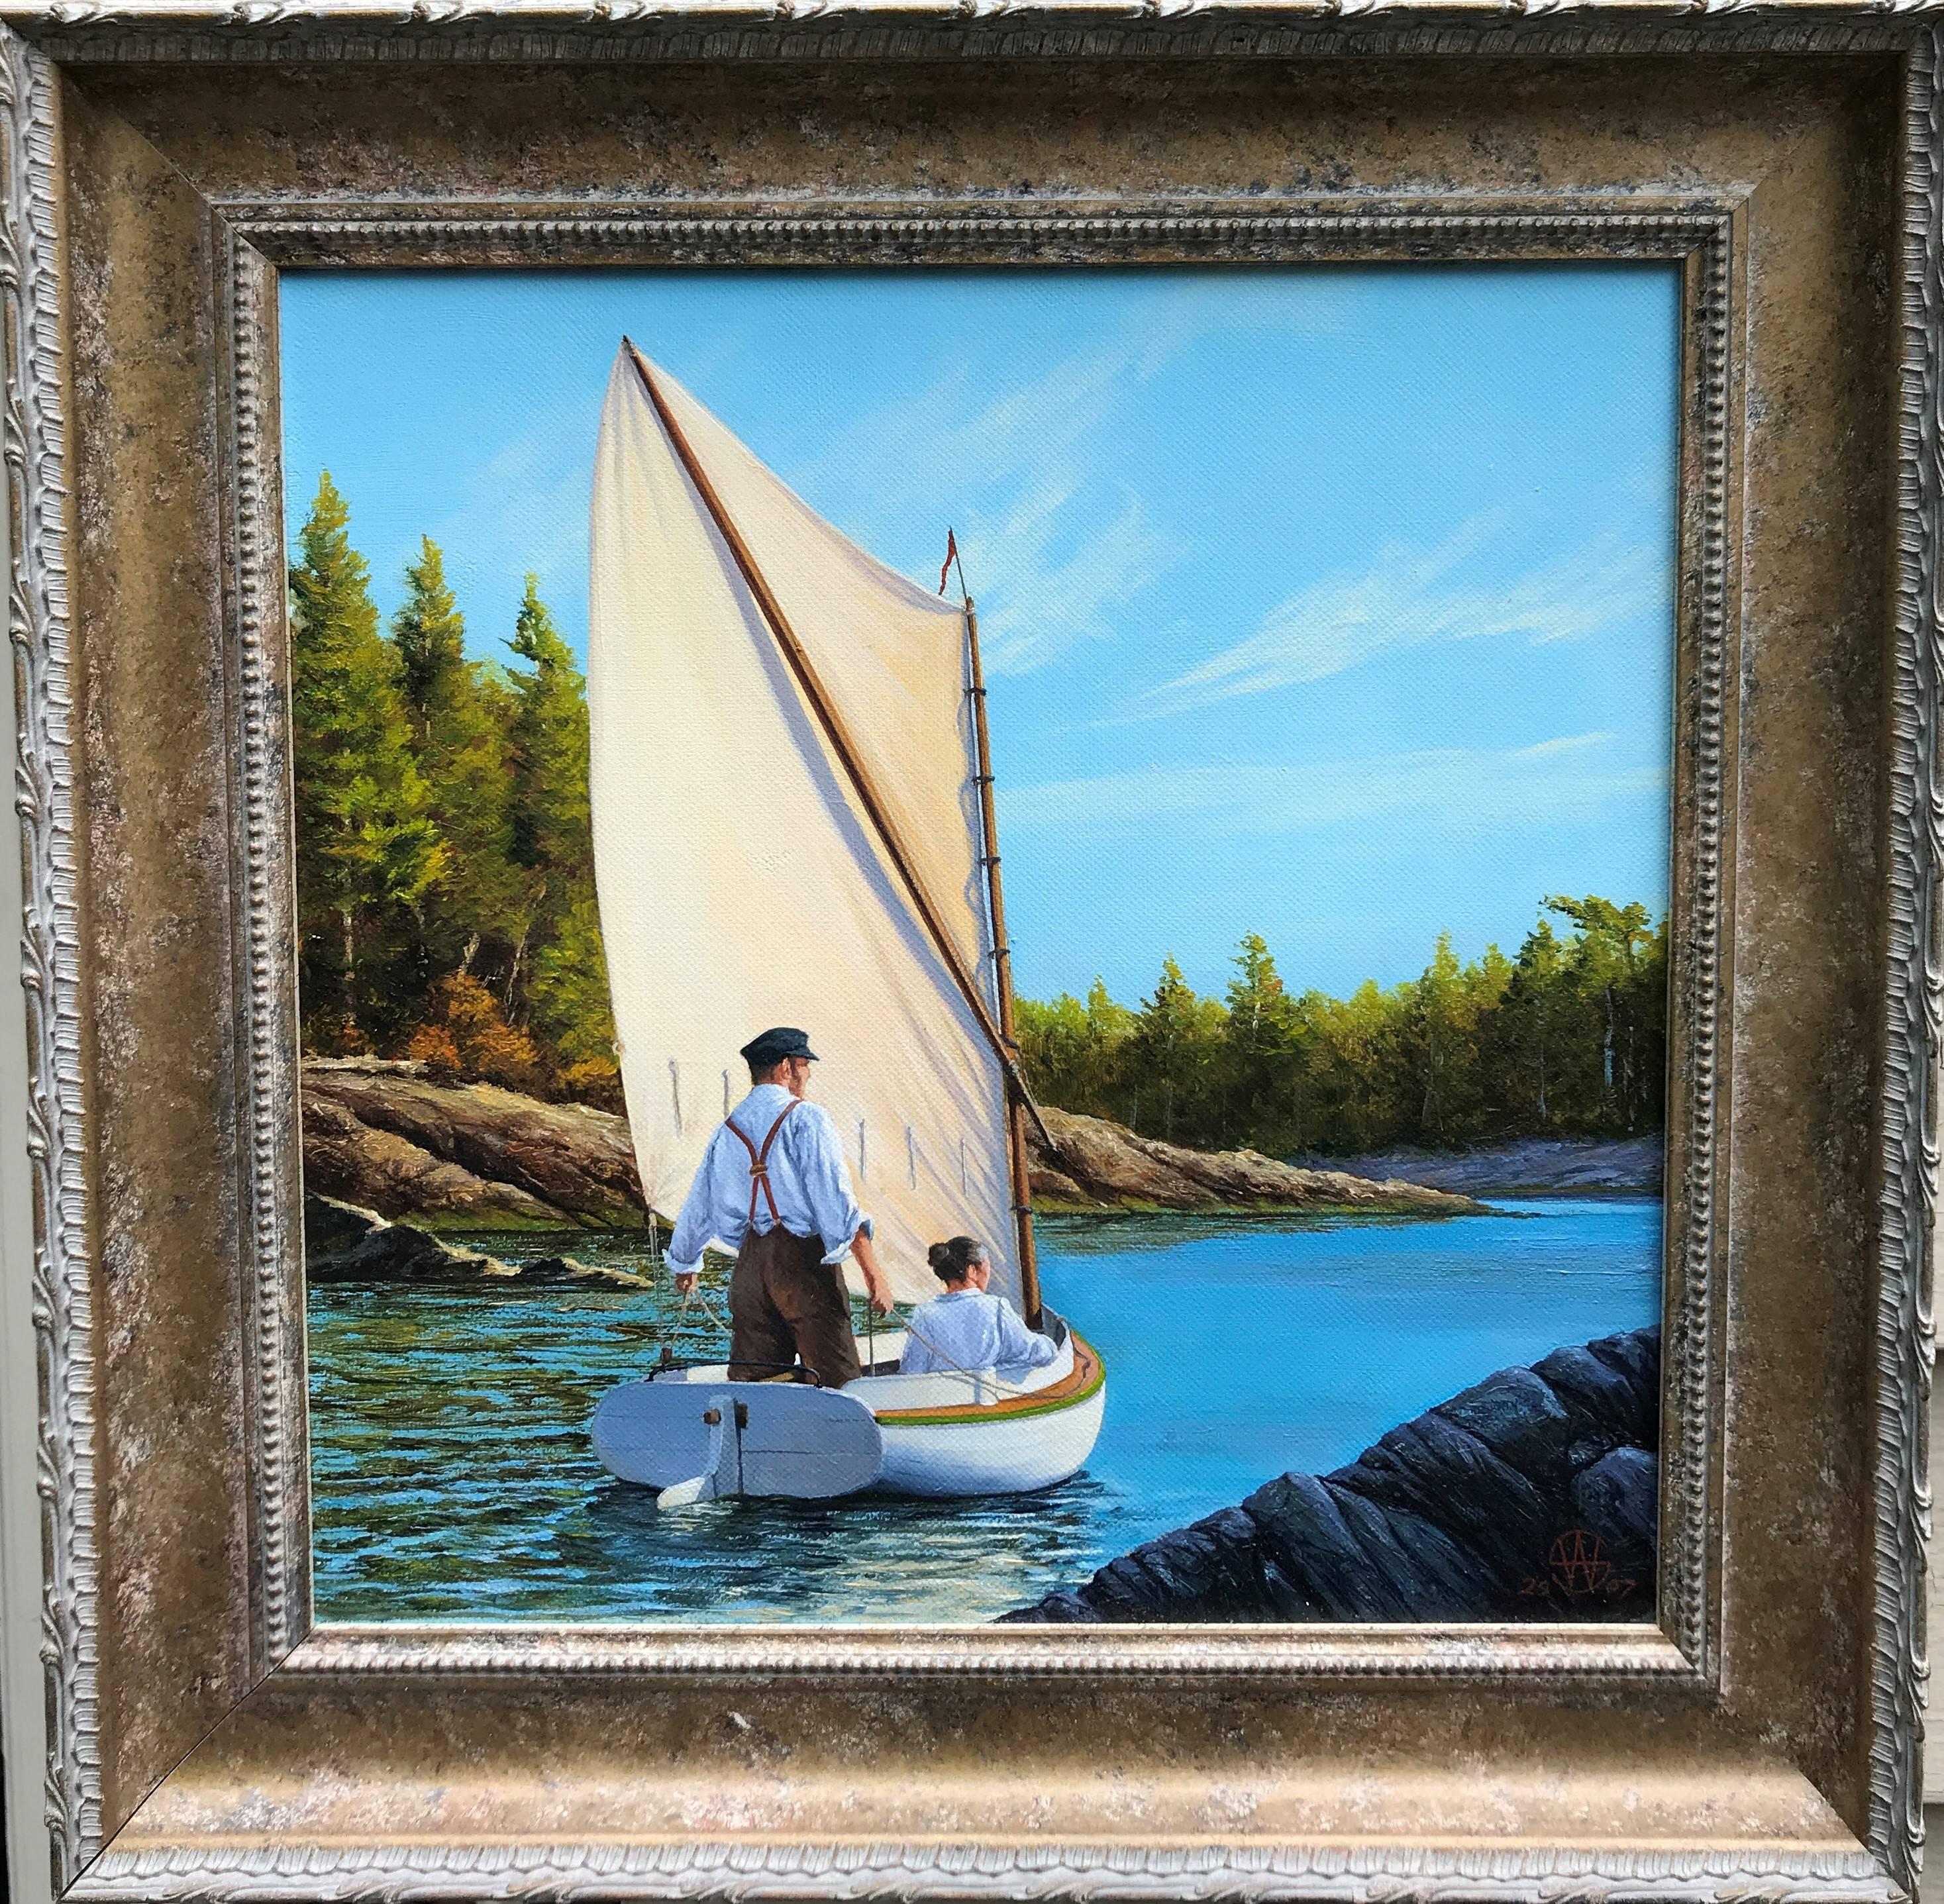 Sailing the River in the Late Afternoon Light - Realist Painting by Andrew S. Walton